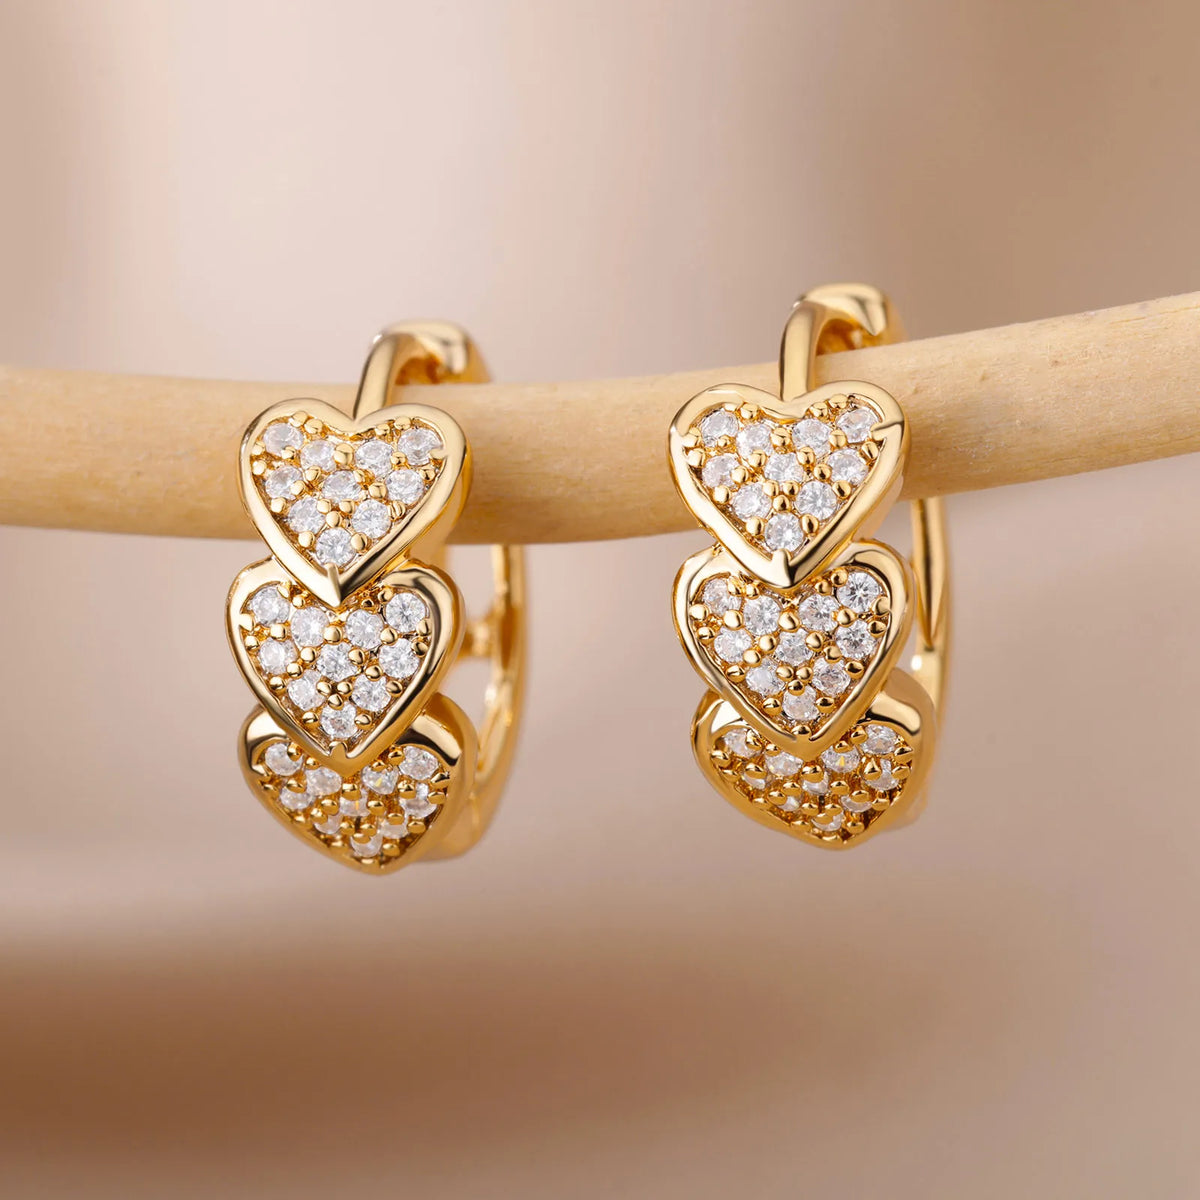 Silver and Gold Zirconia Heart Earrings